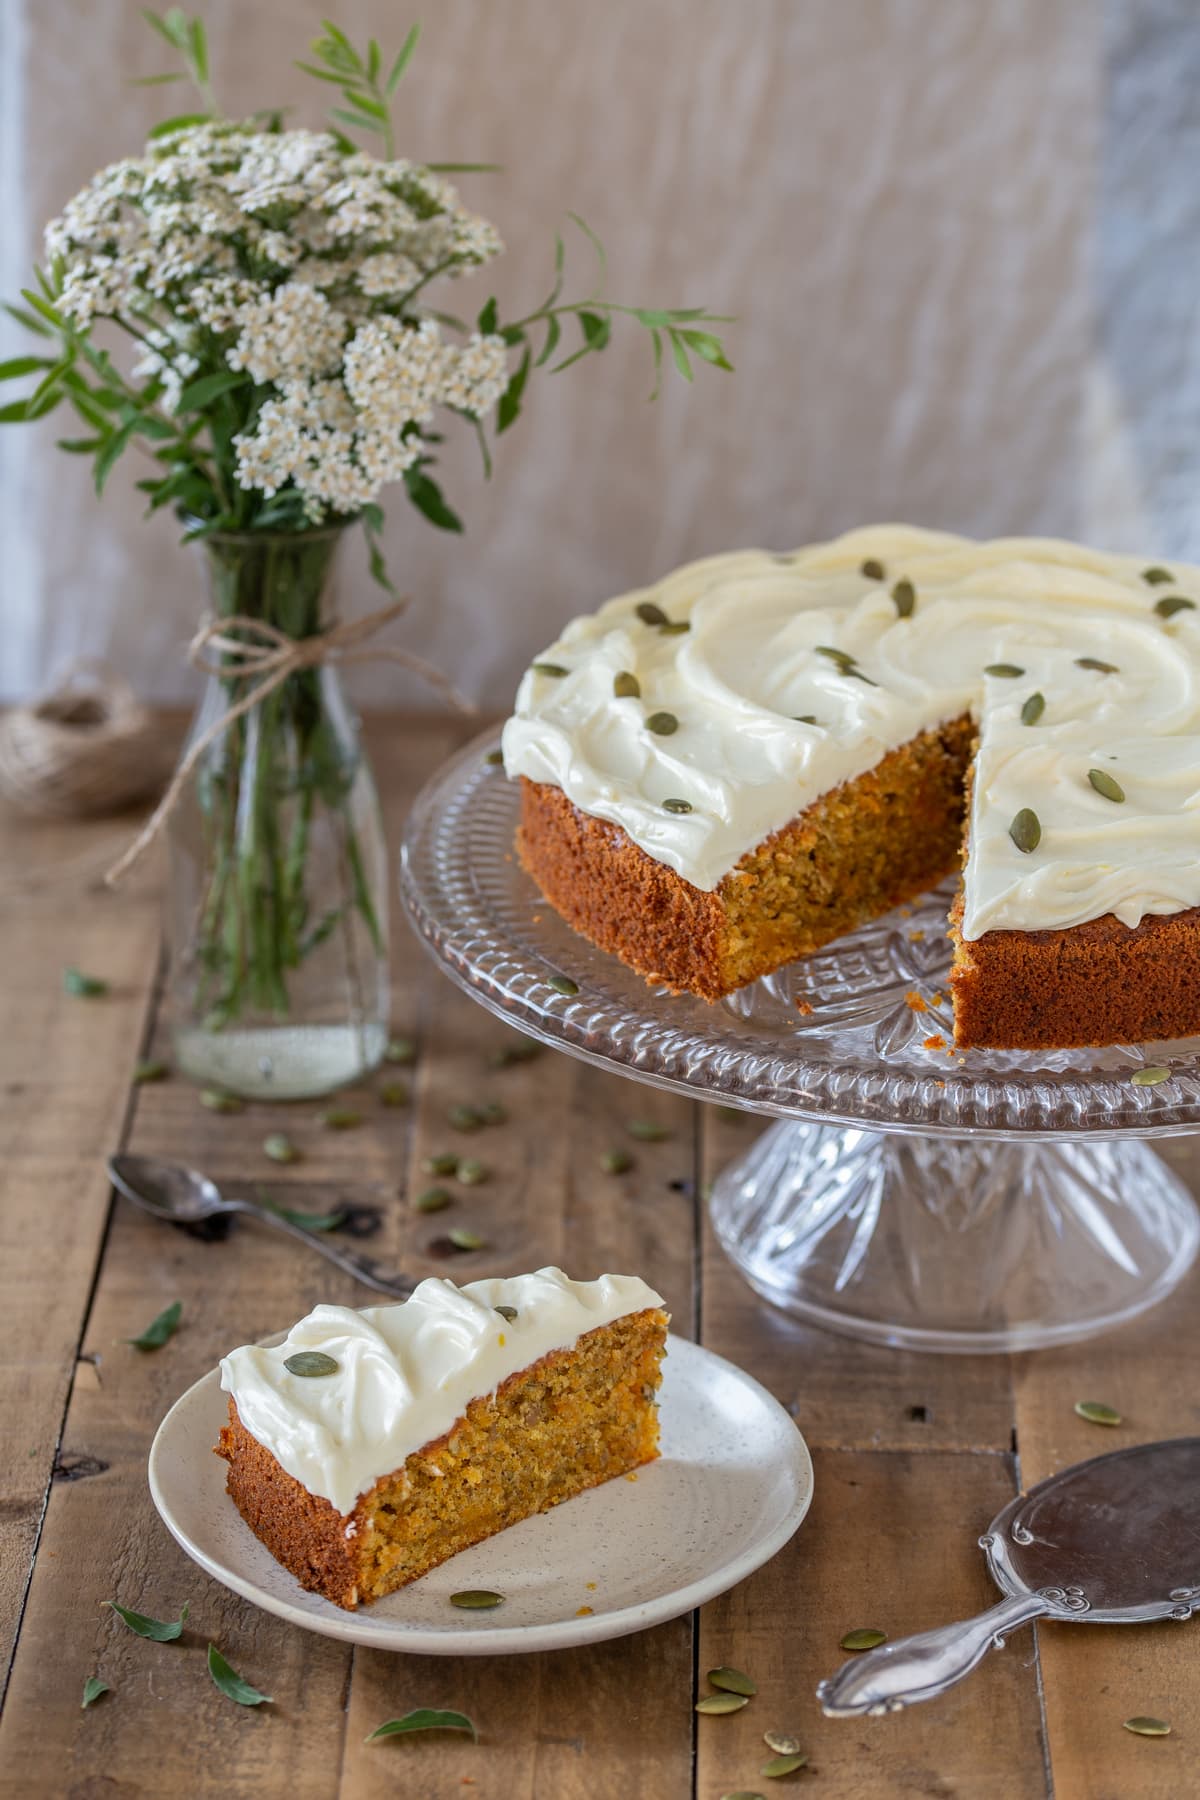 A slice of carrot cake on a plate, the rest of the cake on a cake stand.